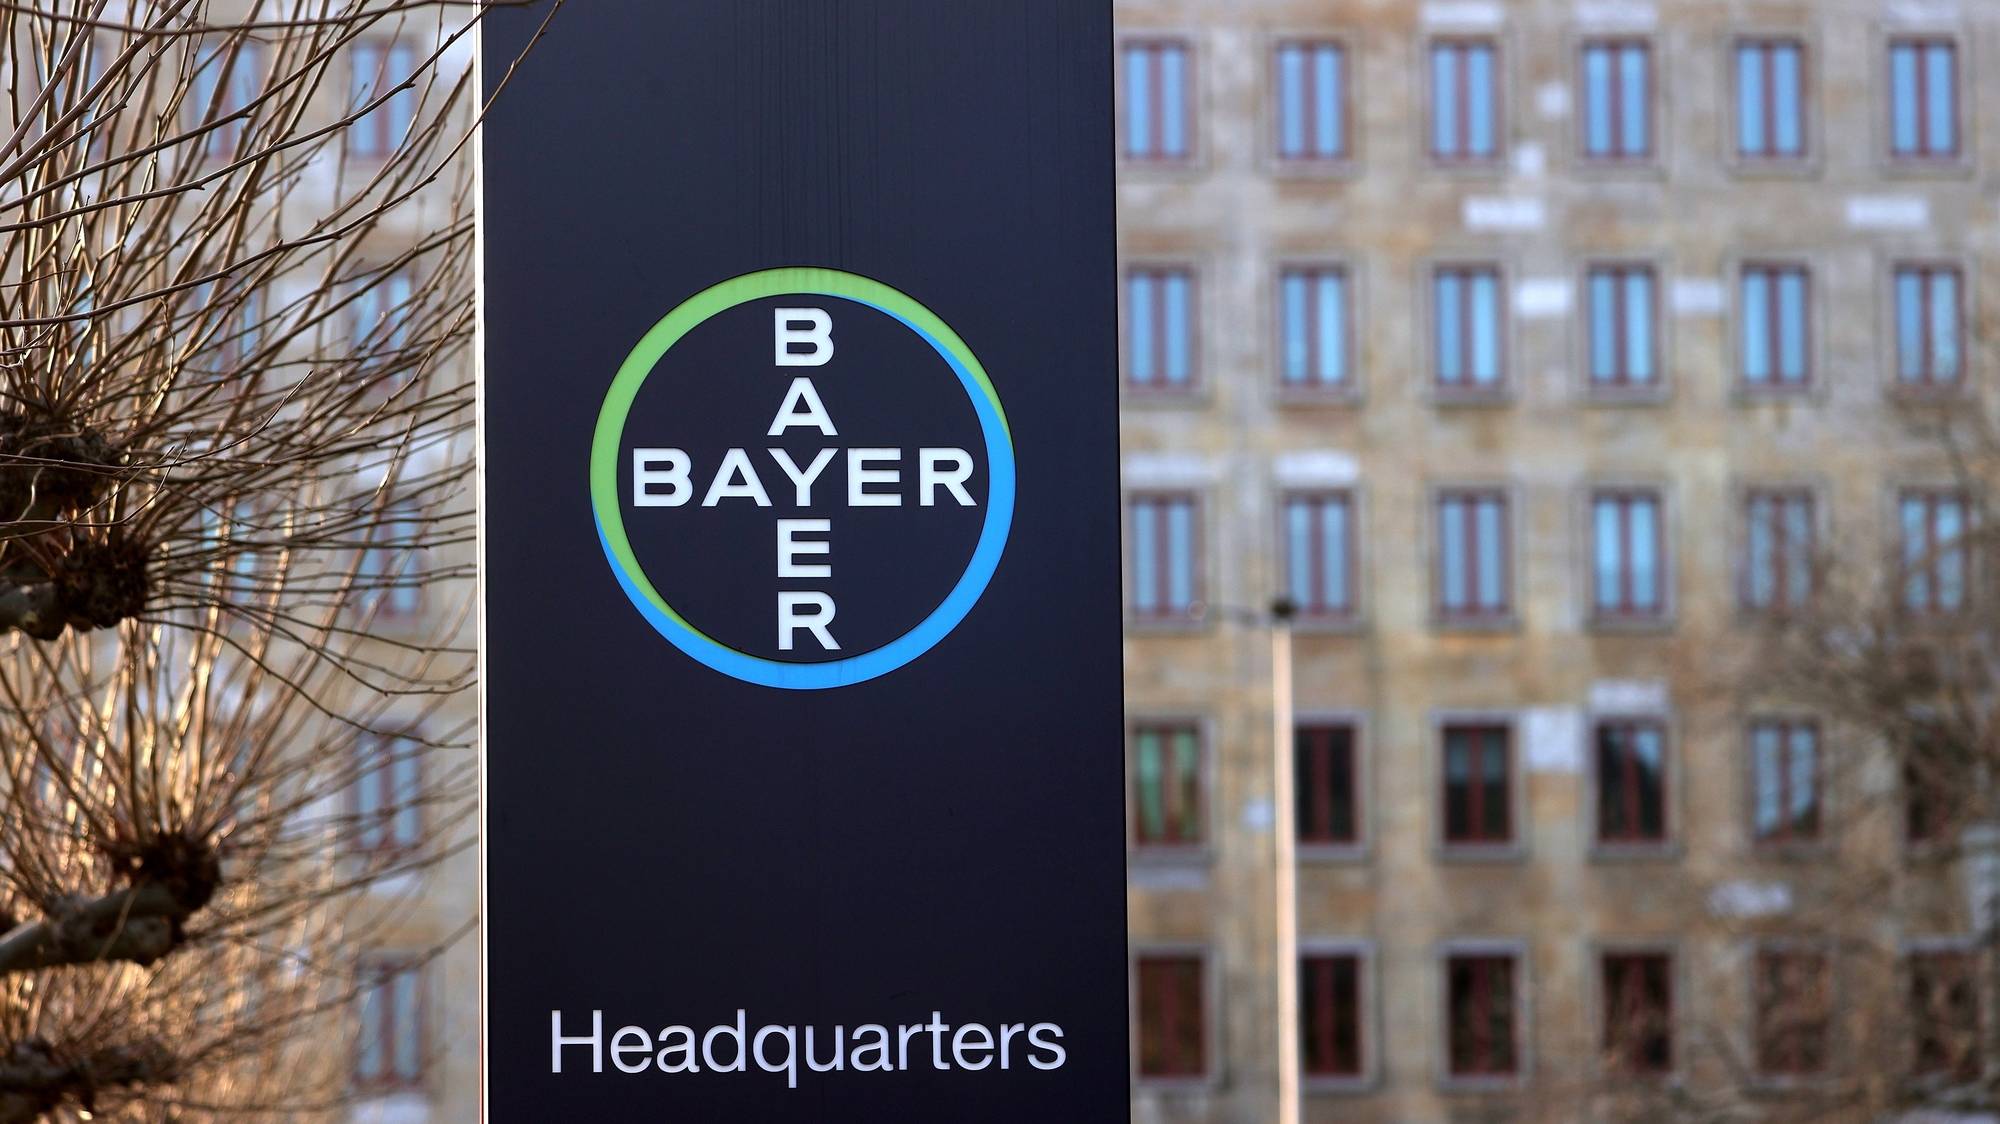 epa09034630 An exterior view of the German pharmaceutical company Bayer headquarters in Leverkusen, Germany, 24 February 2021. German pharmaceutical company Bayer will release their preliminary business figures for the full year 2020 on 25 February 2021.  EPA/FRIEDEMANN VOGEL